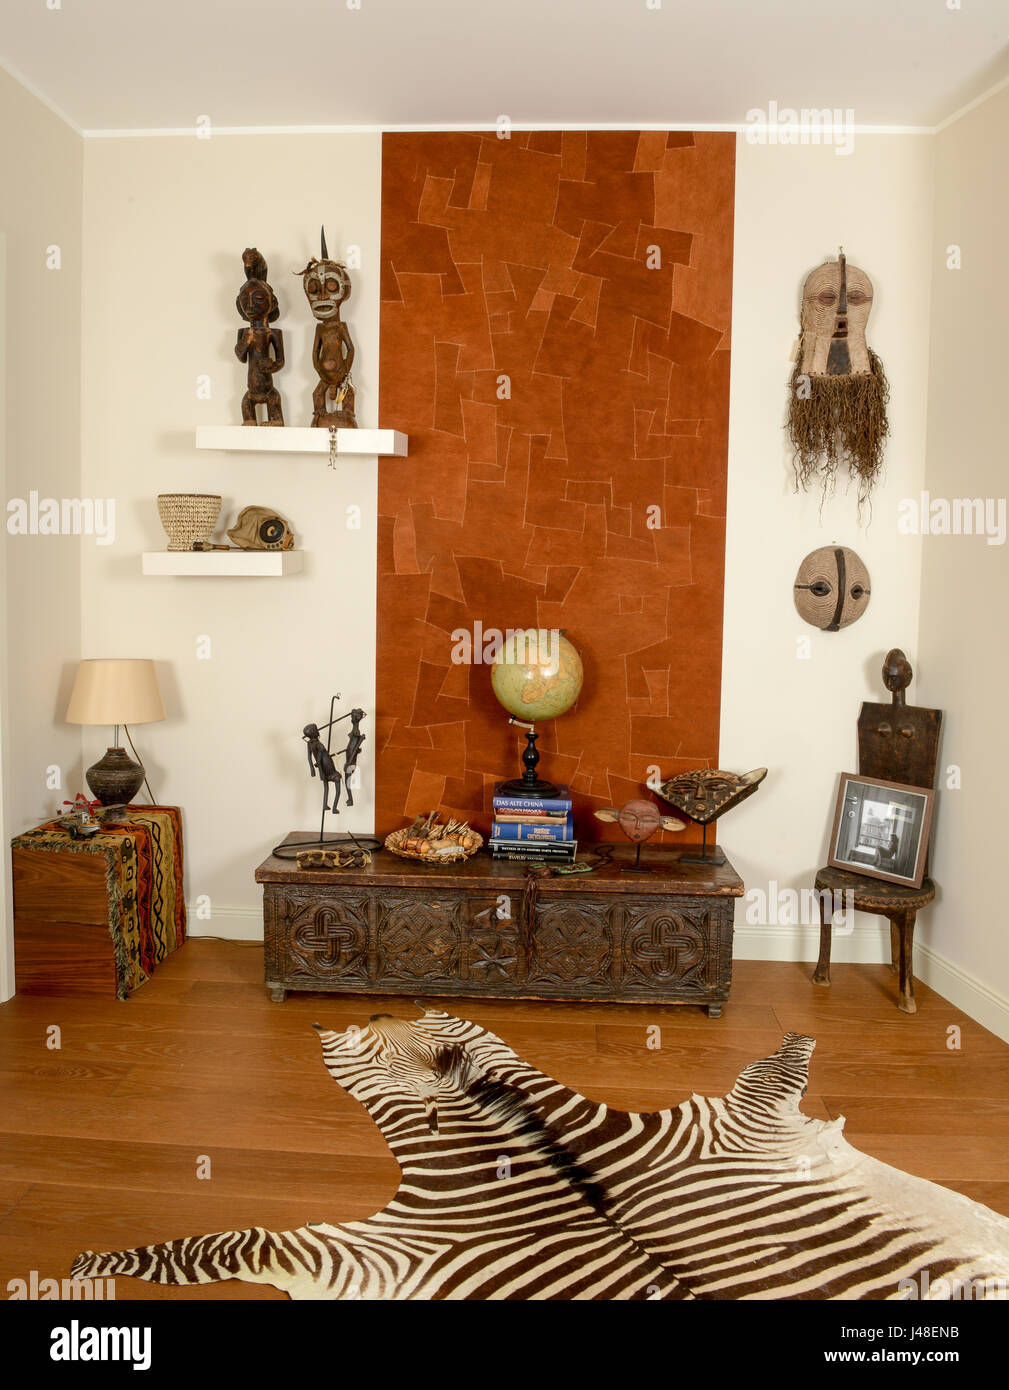 Modern Living Room With African Decorations Stock Photo Alamy